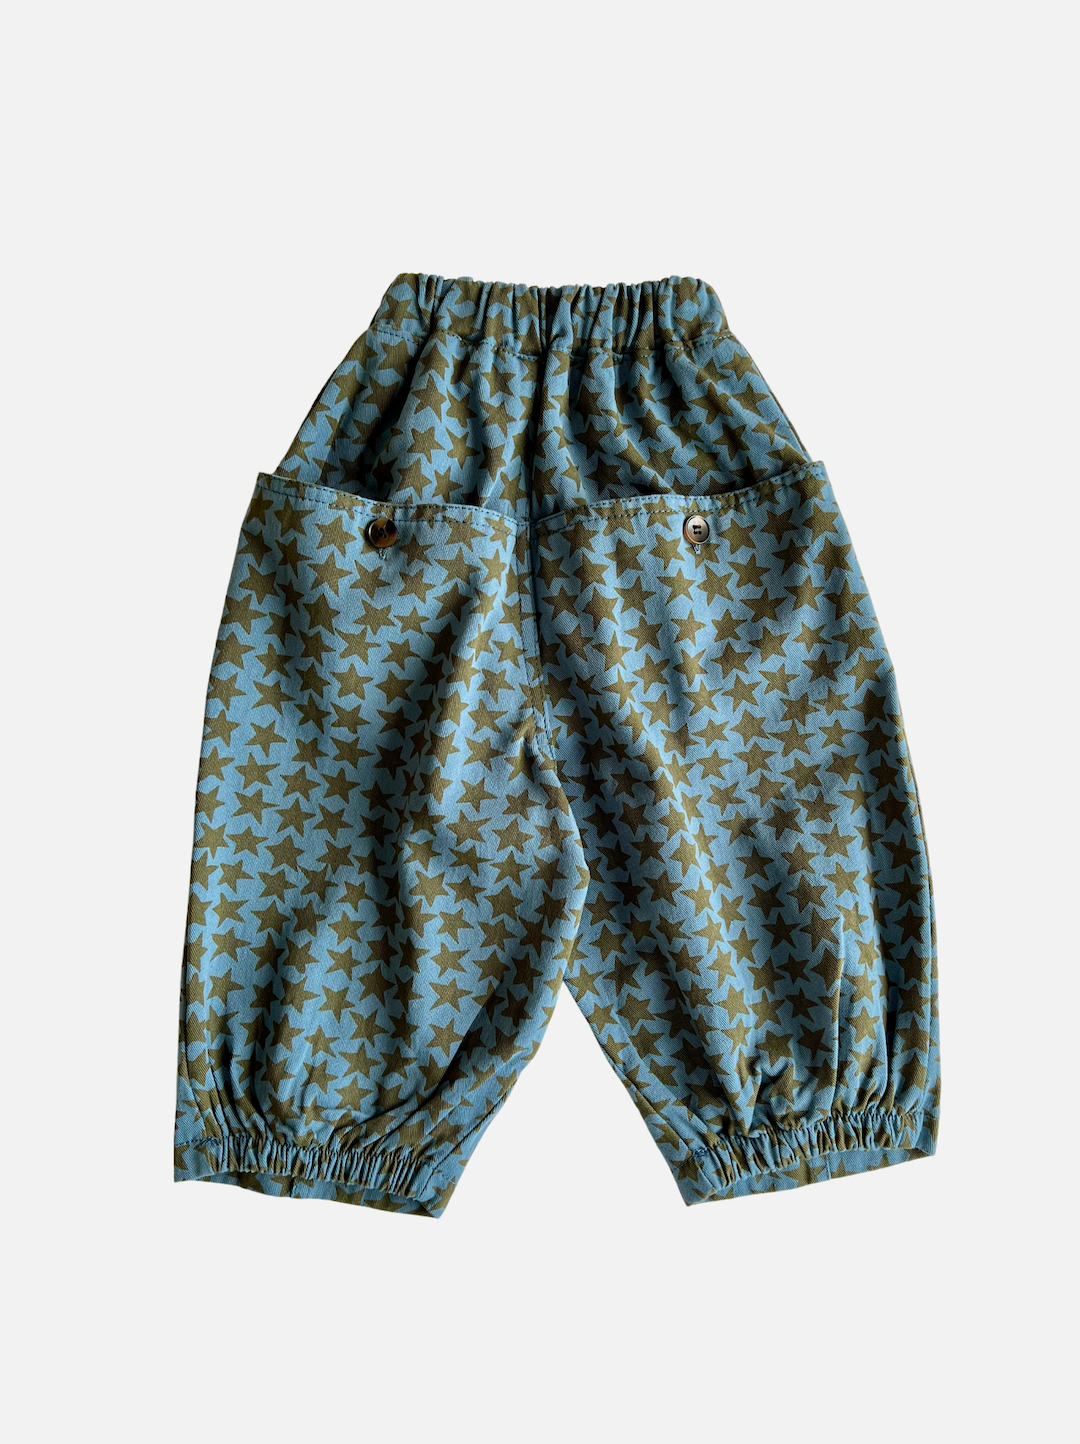 Slate |  A pair of kids' pants in slate blue with an olive green star pattern, and buttoned back pockets, rear view 